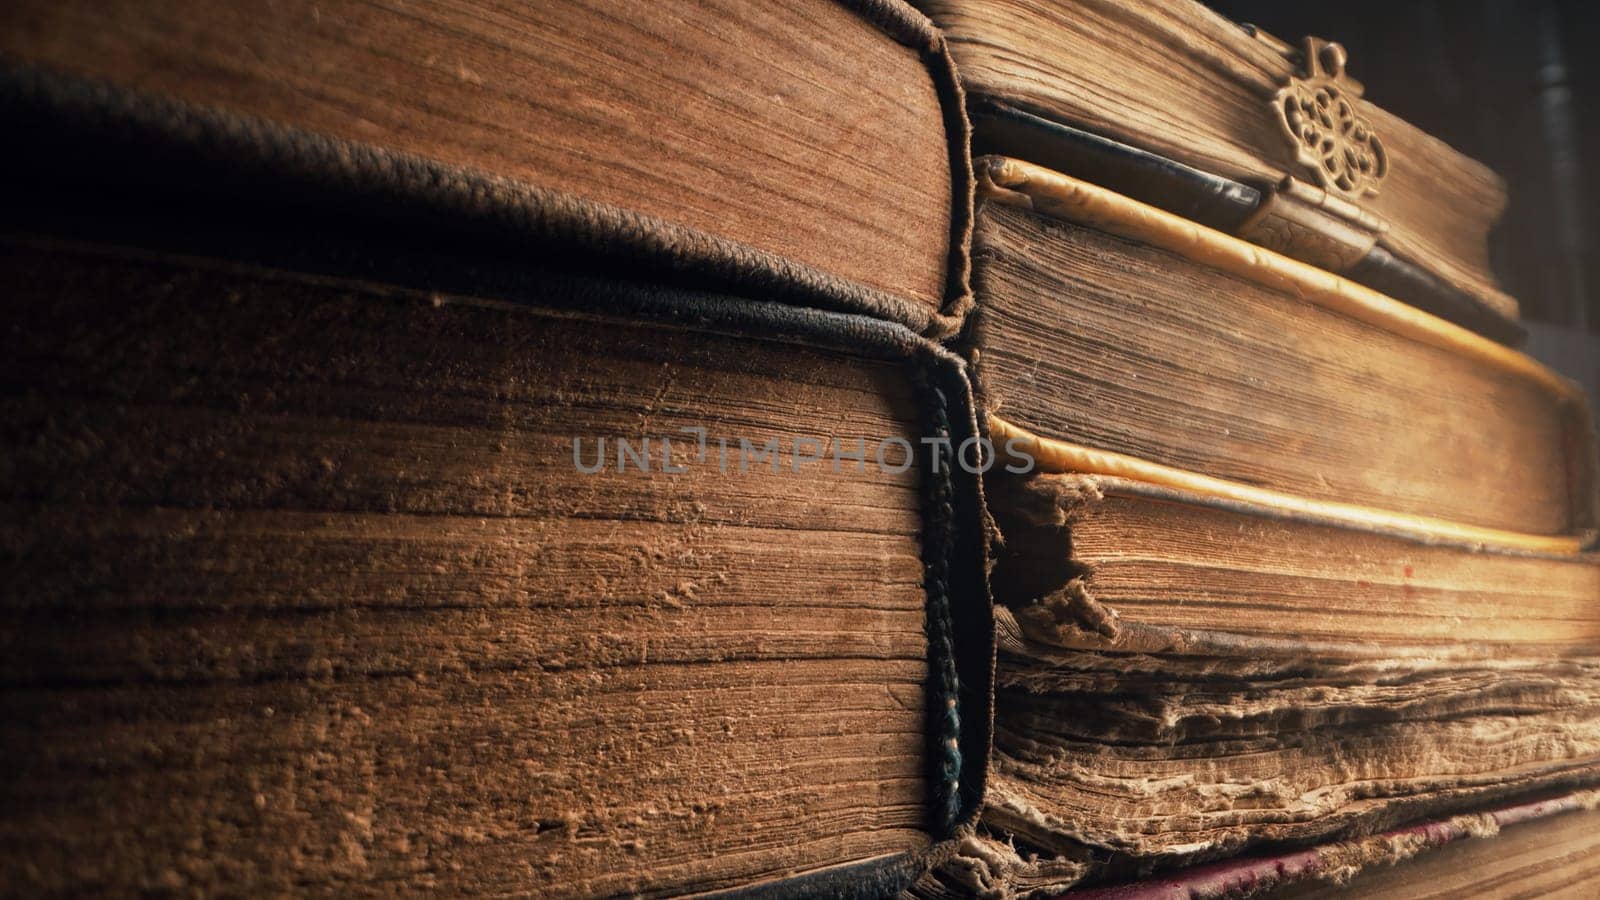 Old books in antique shop or abandoned library. Macro footage. Bookstore in vintage style. Literature, knowledge, information concept. by kristina_kokhanova